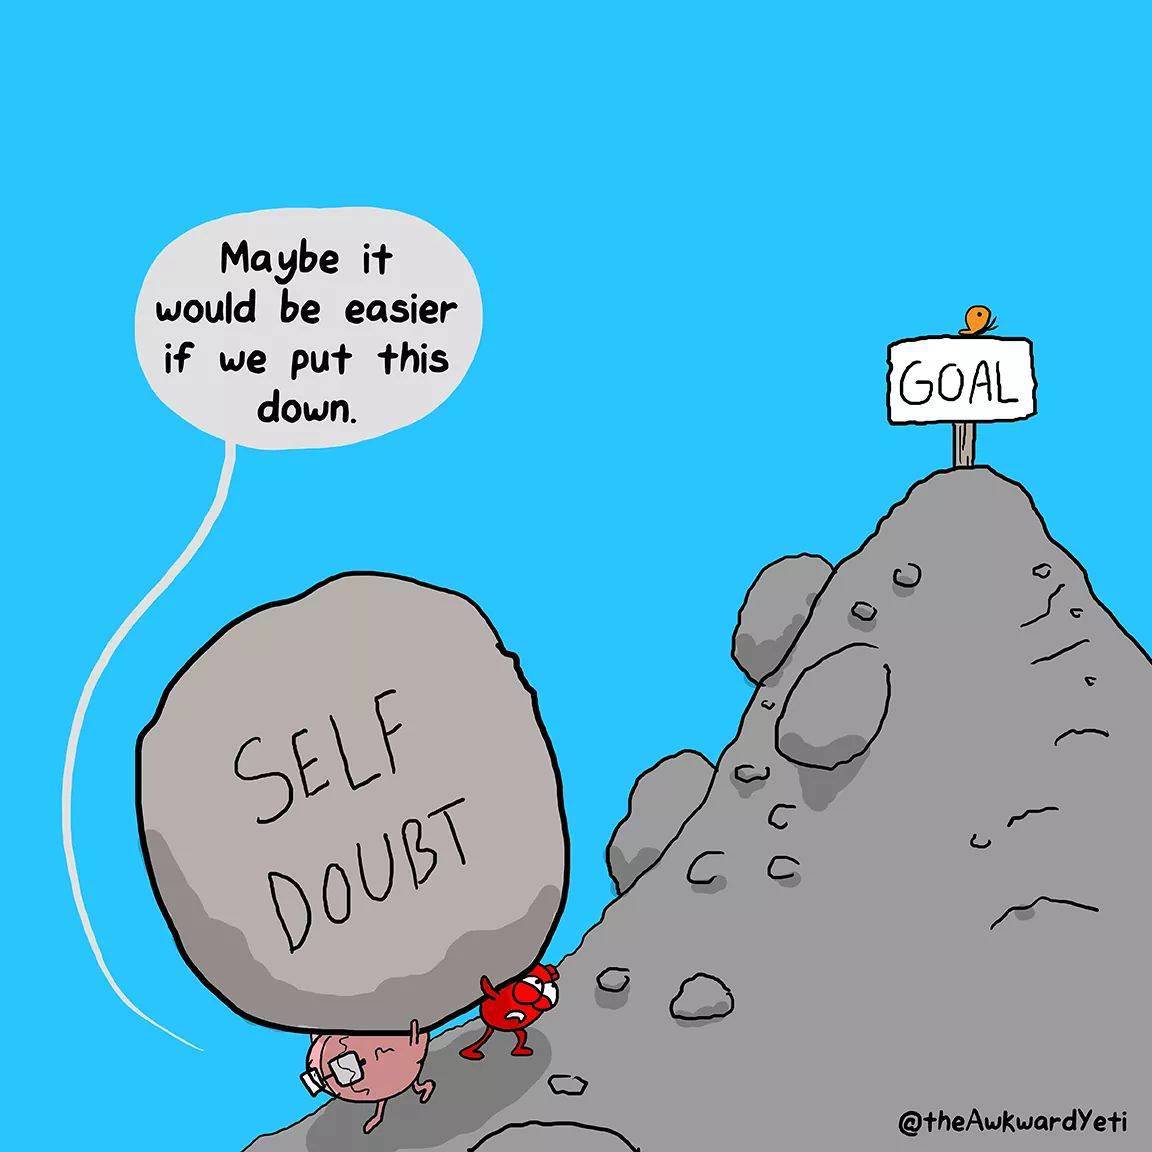 awkward yeti self doubt - Maybe it would be easier if we put this down. Goal Self Doubt my AwkwardYeti